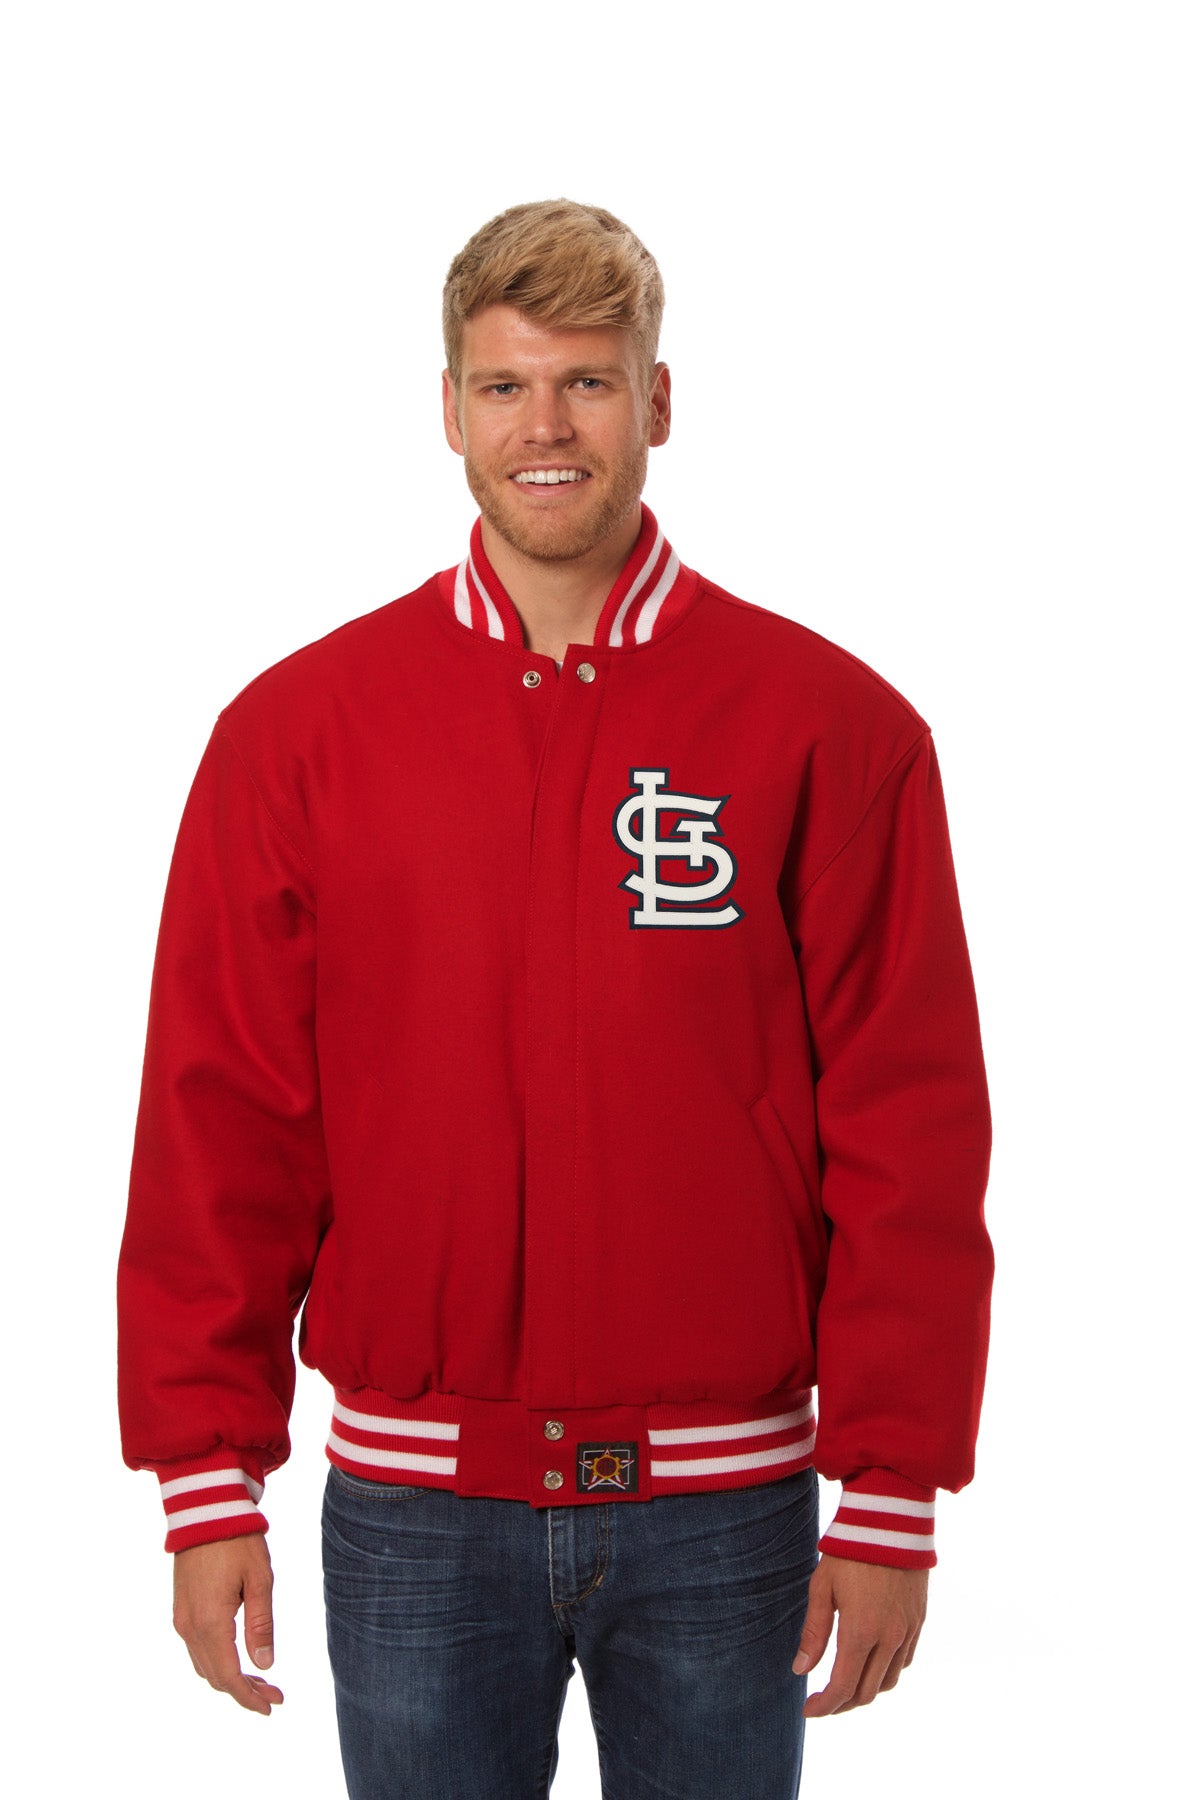 St. Louis Cardinals Wool Jacket w/ Handcrafted Leather Logos - Red | J.H. Sports Jackets